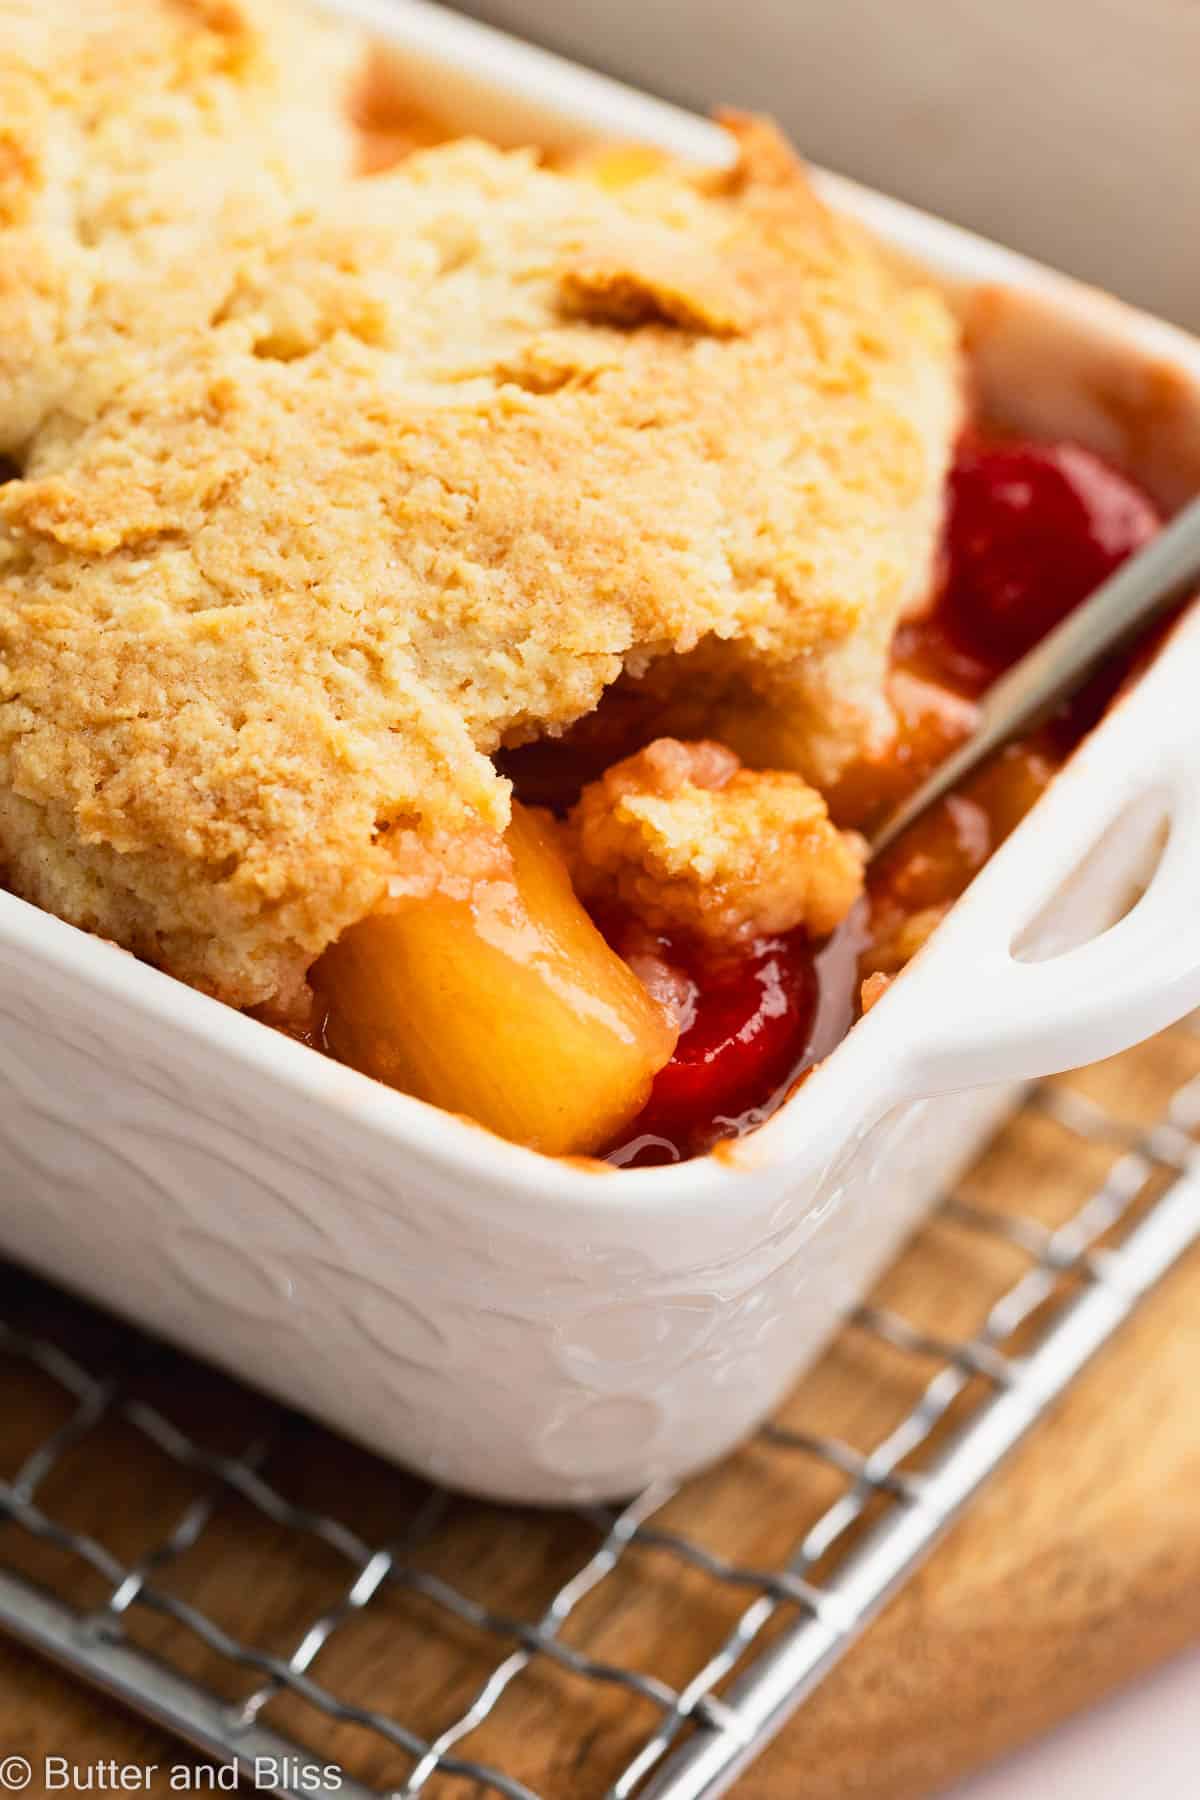 Gooey inside of a pineapple upside down cobbler with biscuit topping.